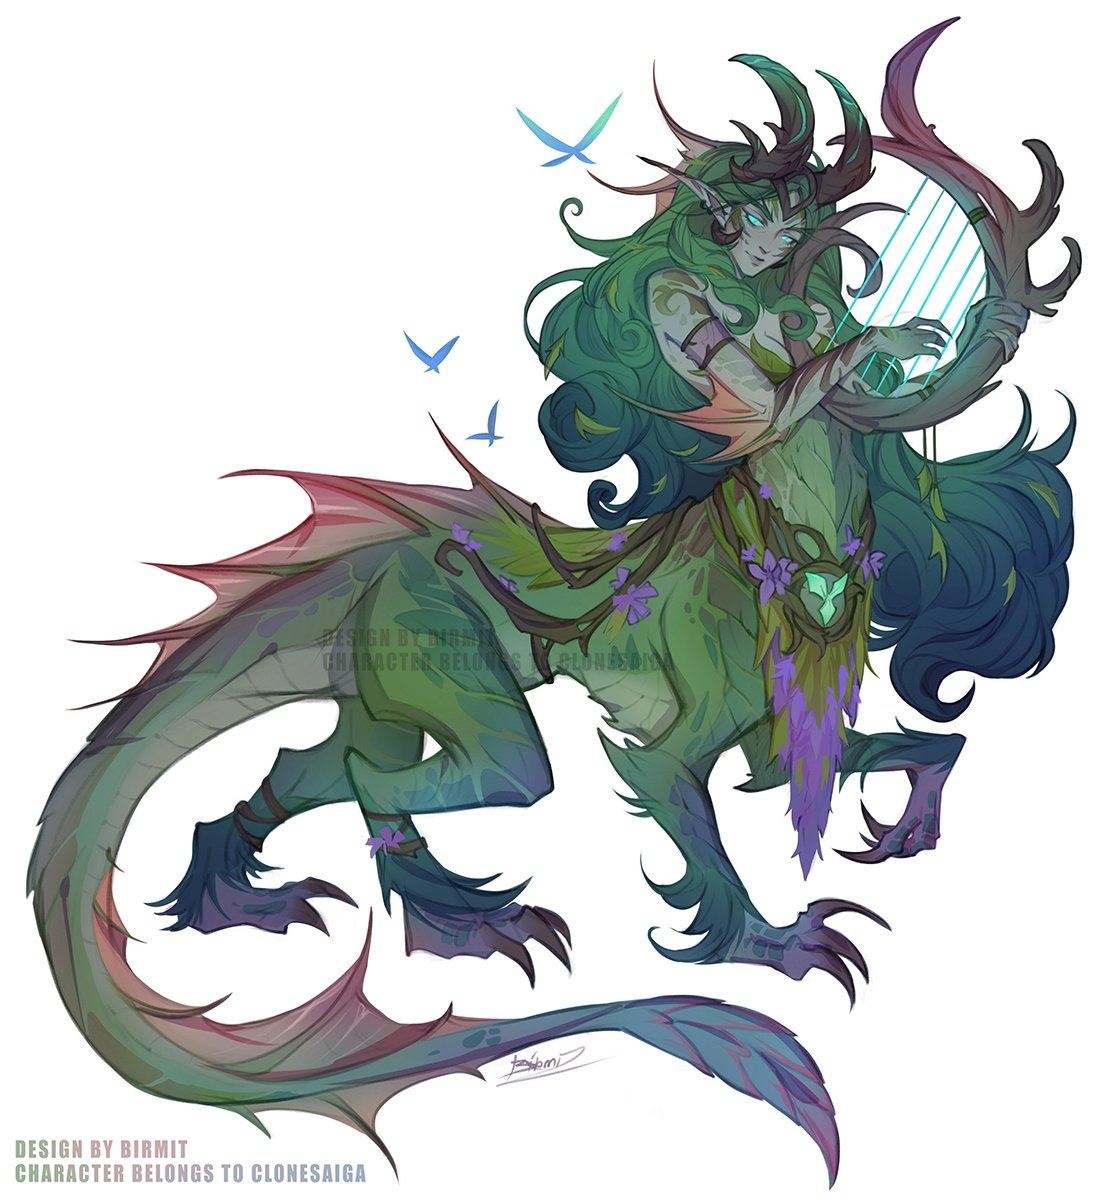 50K ART RAFFLE (sketch design like here) ✨🐉 sorry I was too happy lol • Follow + RT • Tell me a story about your OC and why they're so important to you + add their image • 1 winner get a free sketch outfit design slot (artistic freedom type, no edits) Ends June 1st!